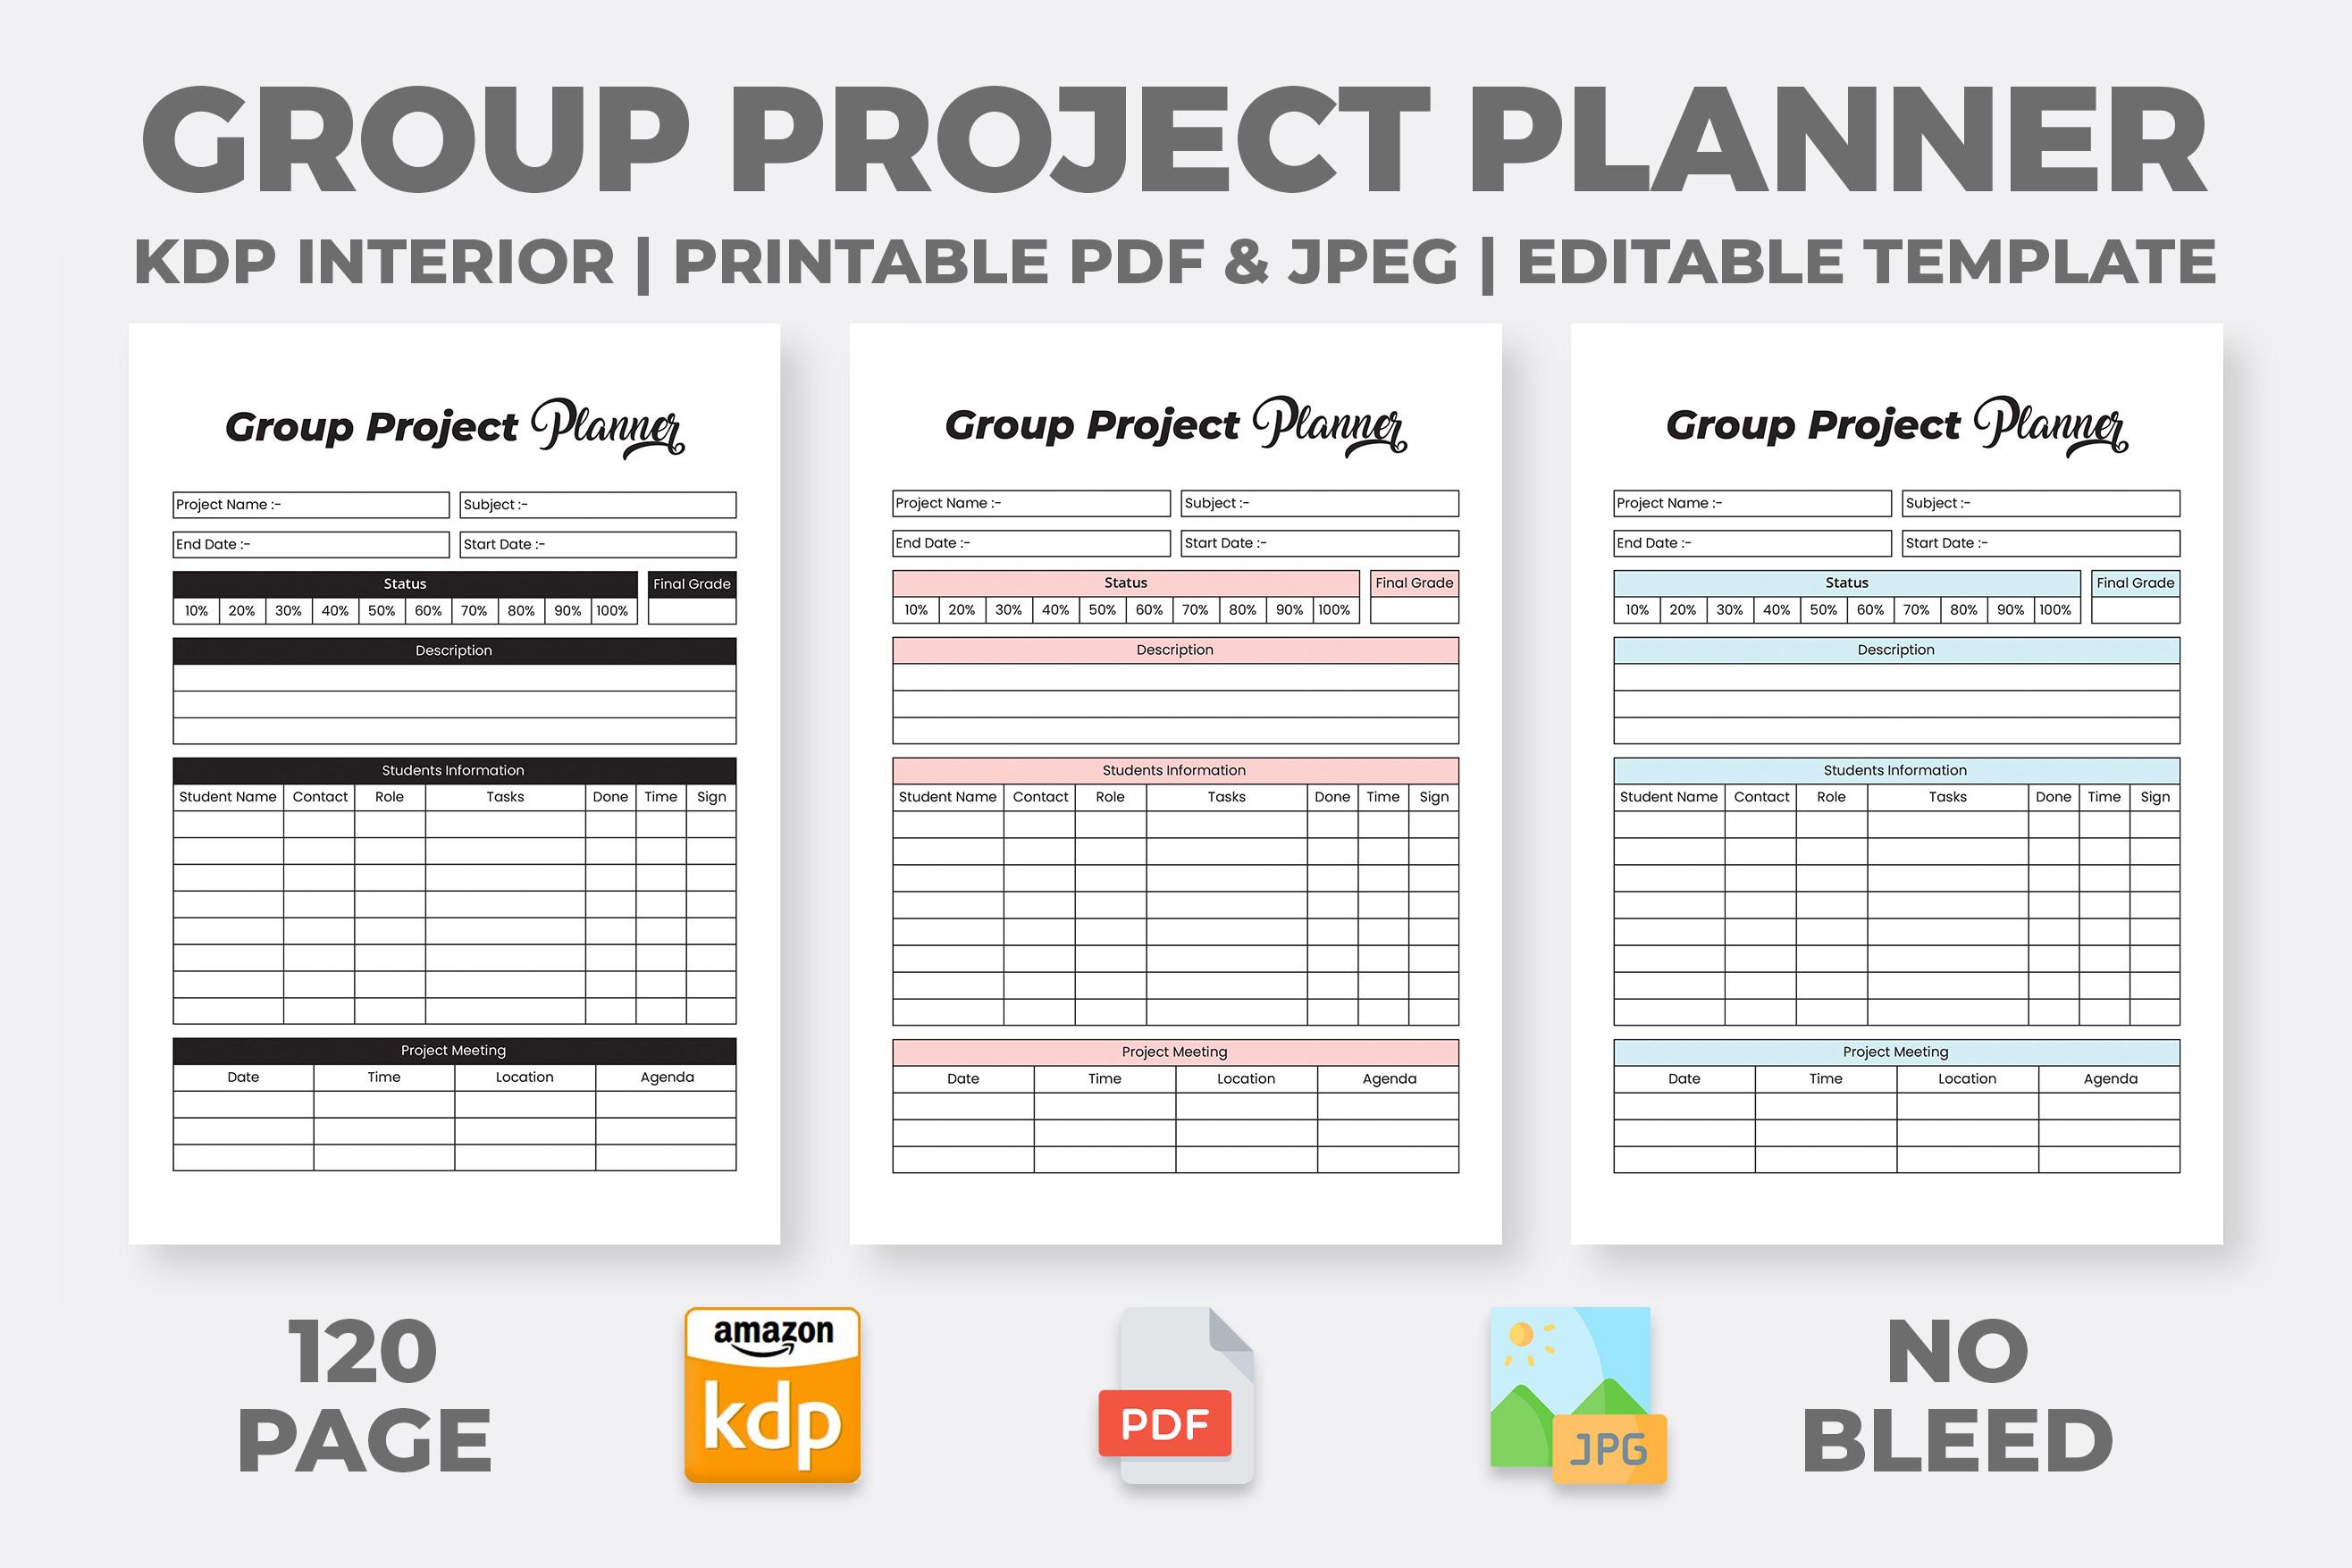 Group Project Planner - KDP Interior